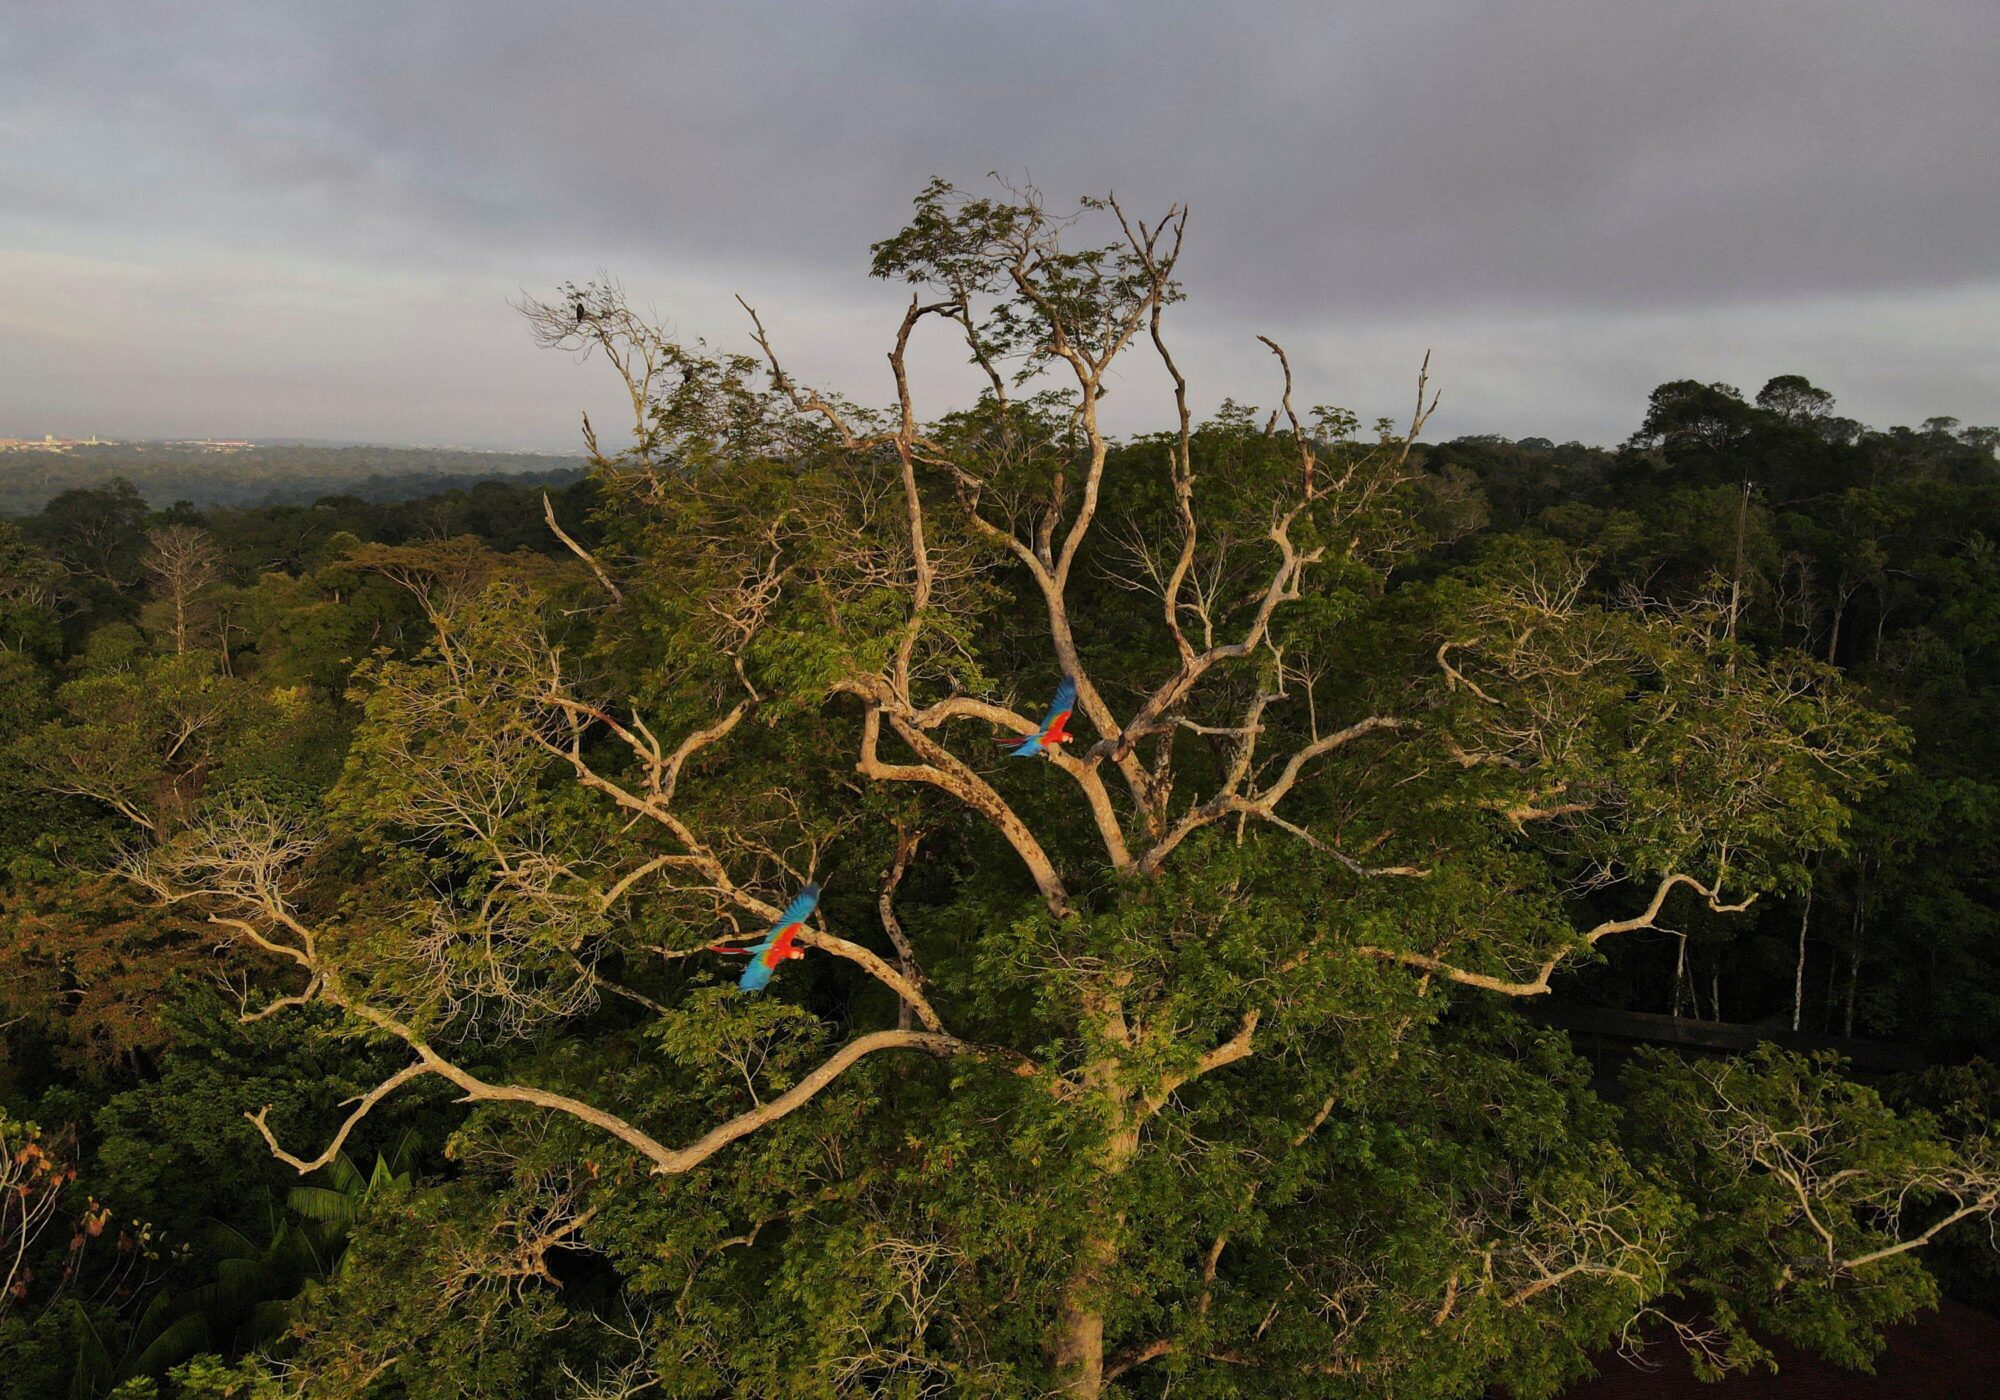 <p><span style="font-weight: 400;">Macaws fly over the Amazon rainforest in Manaus, Brazil. In 2023, the world will be watching newly-elected President Lula’s relationship with China, which could prove pivotal to reversing deforestation in the tropical forest. (Image: Bruno Kelly / Alamy) </span></p>